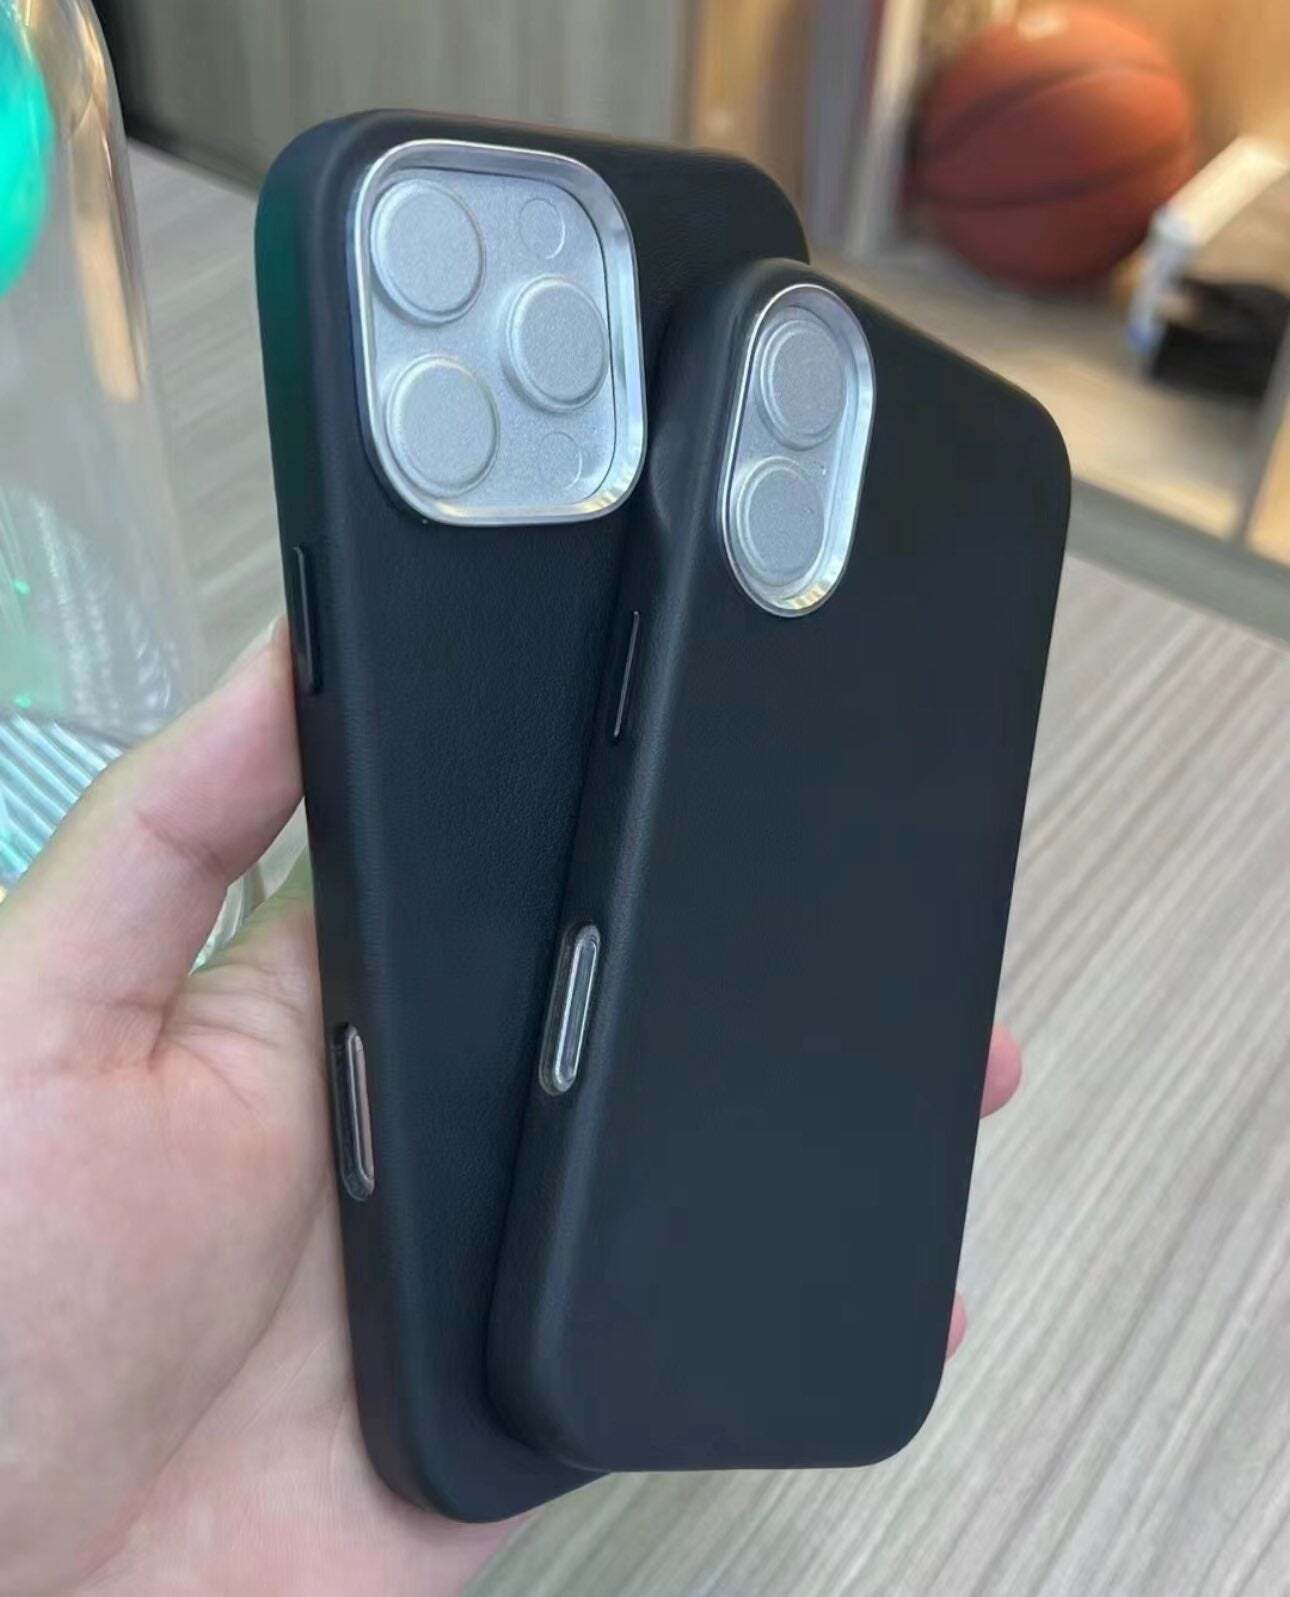 iPhone 16 cases give us a clear view of the Capture button - iPhone 16 release date expectations, price estimates, and upgrades